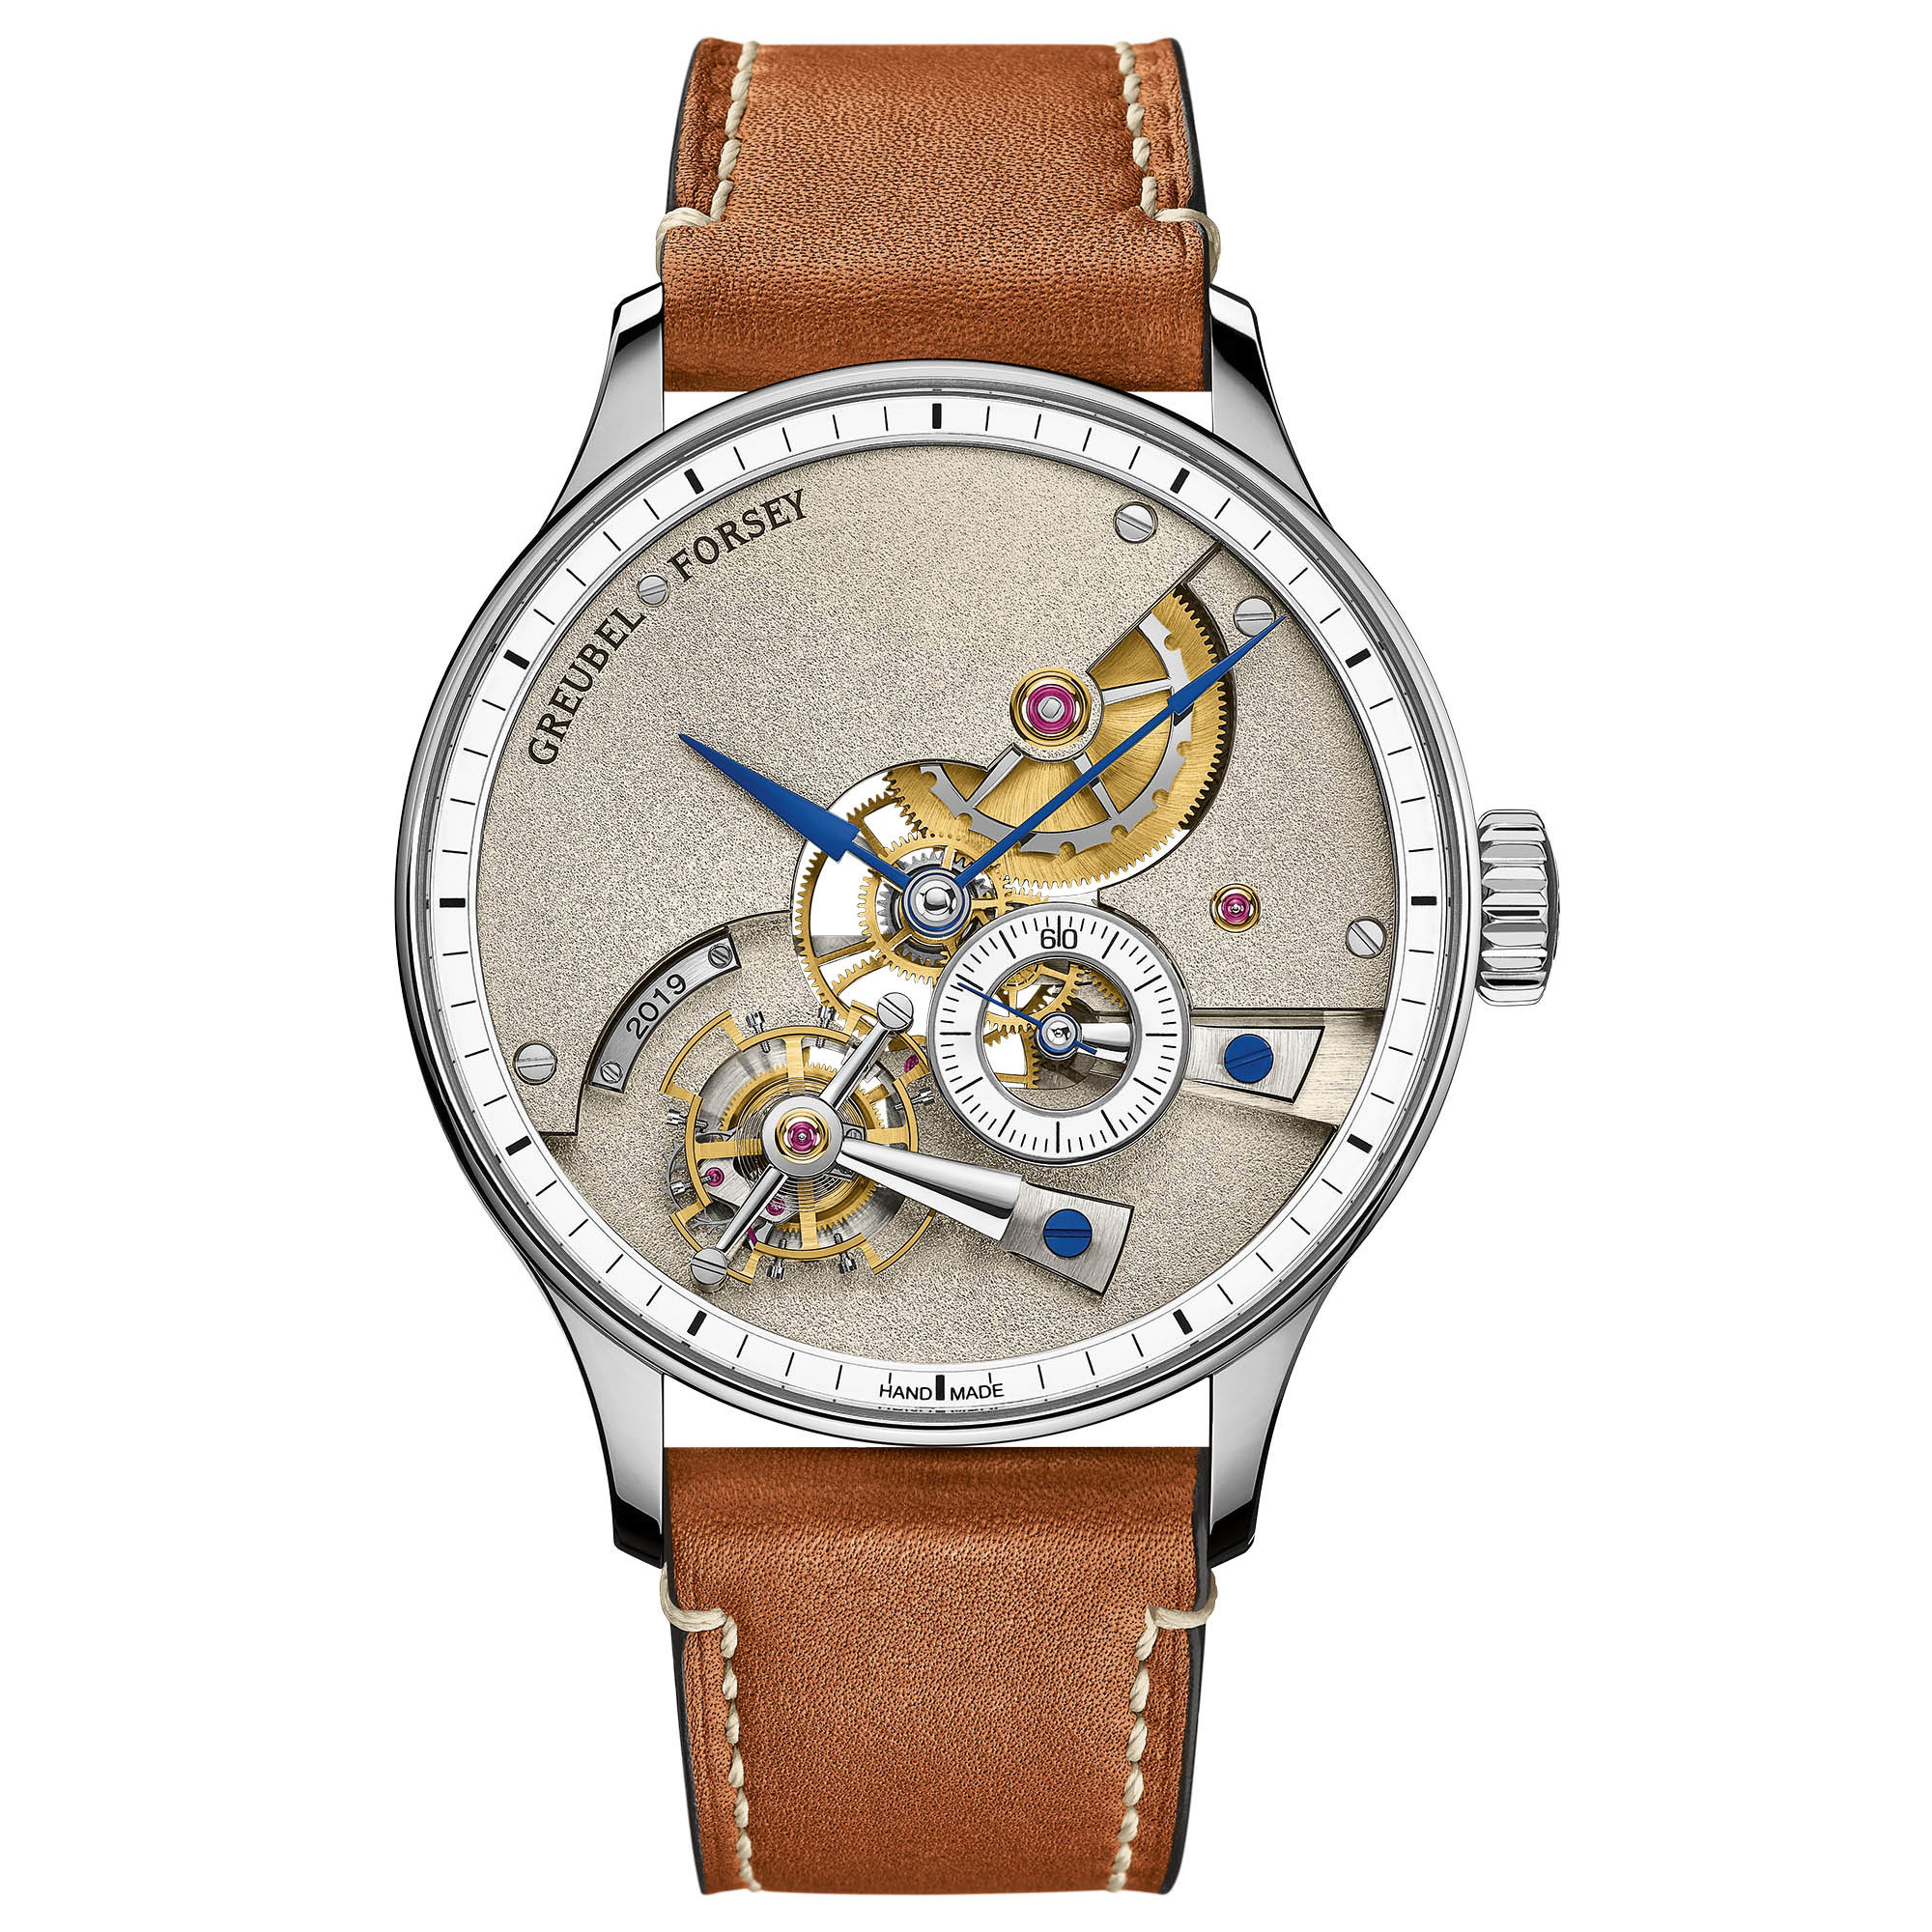 new Greubel Forsey Hand Made 1 watch for sale